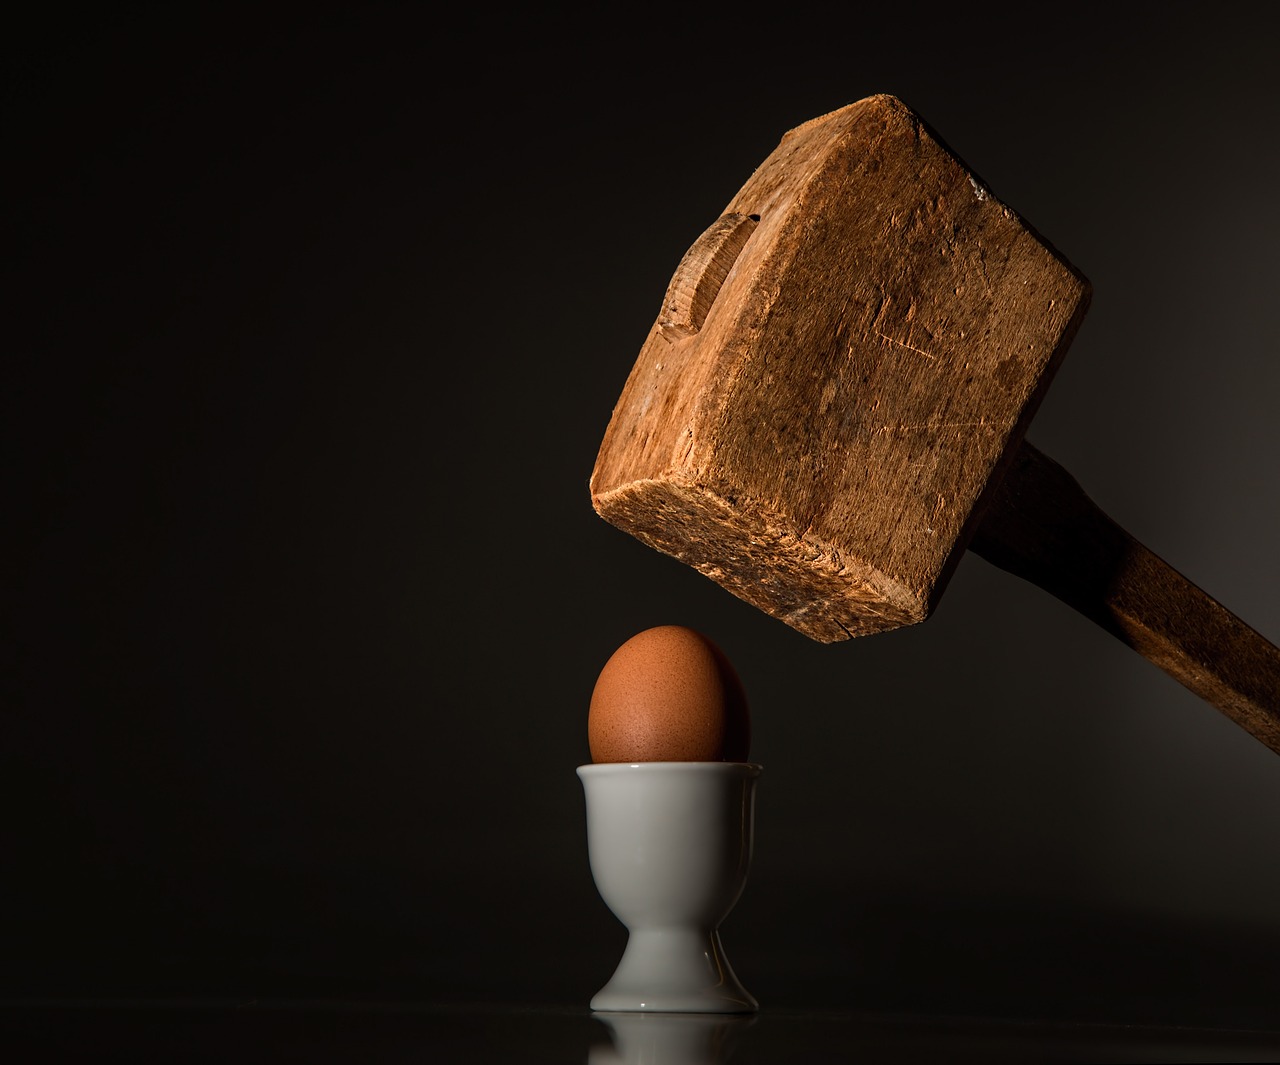 Wooden mallet about to crush a poached egg